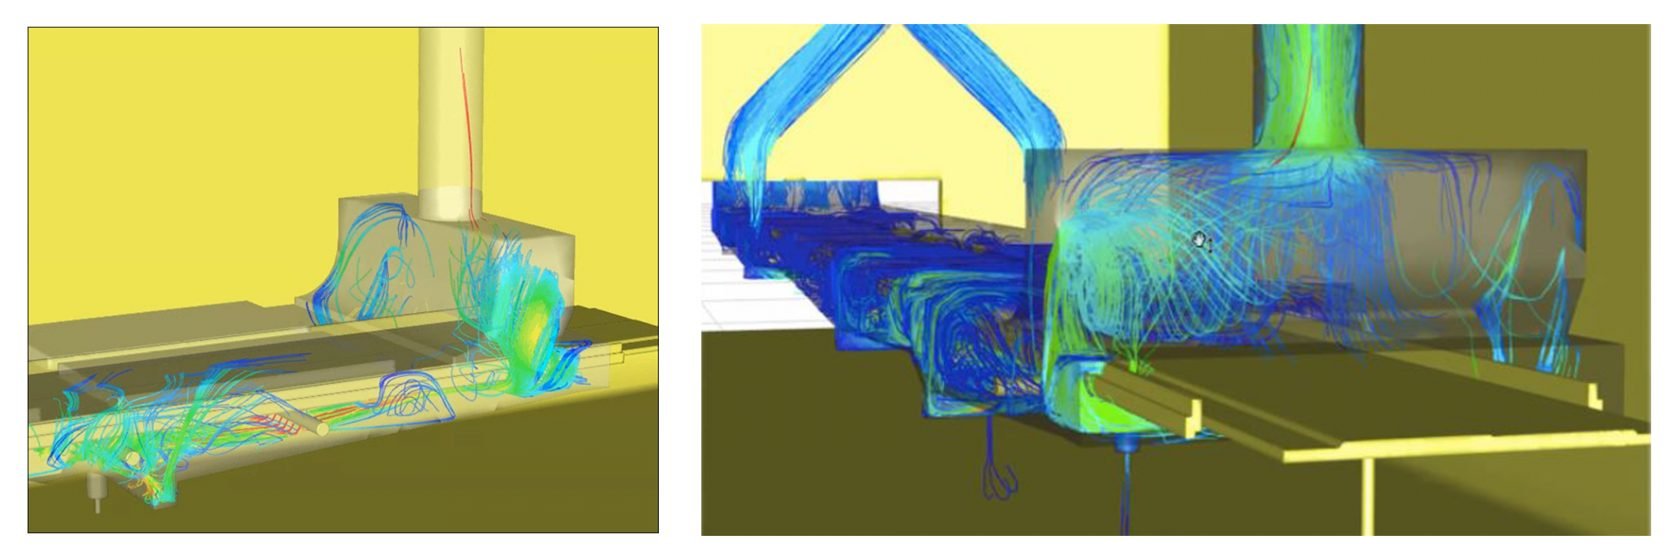 CFD models showing velocity of airflow inside an oven for food manufacturing.